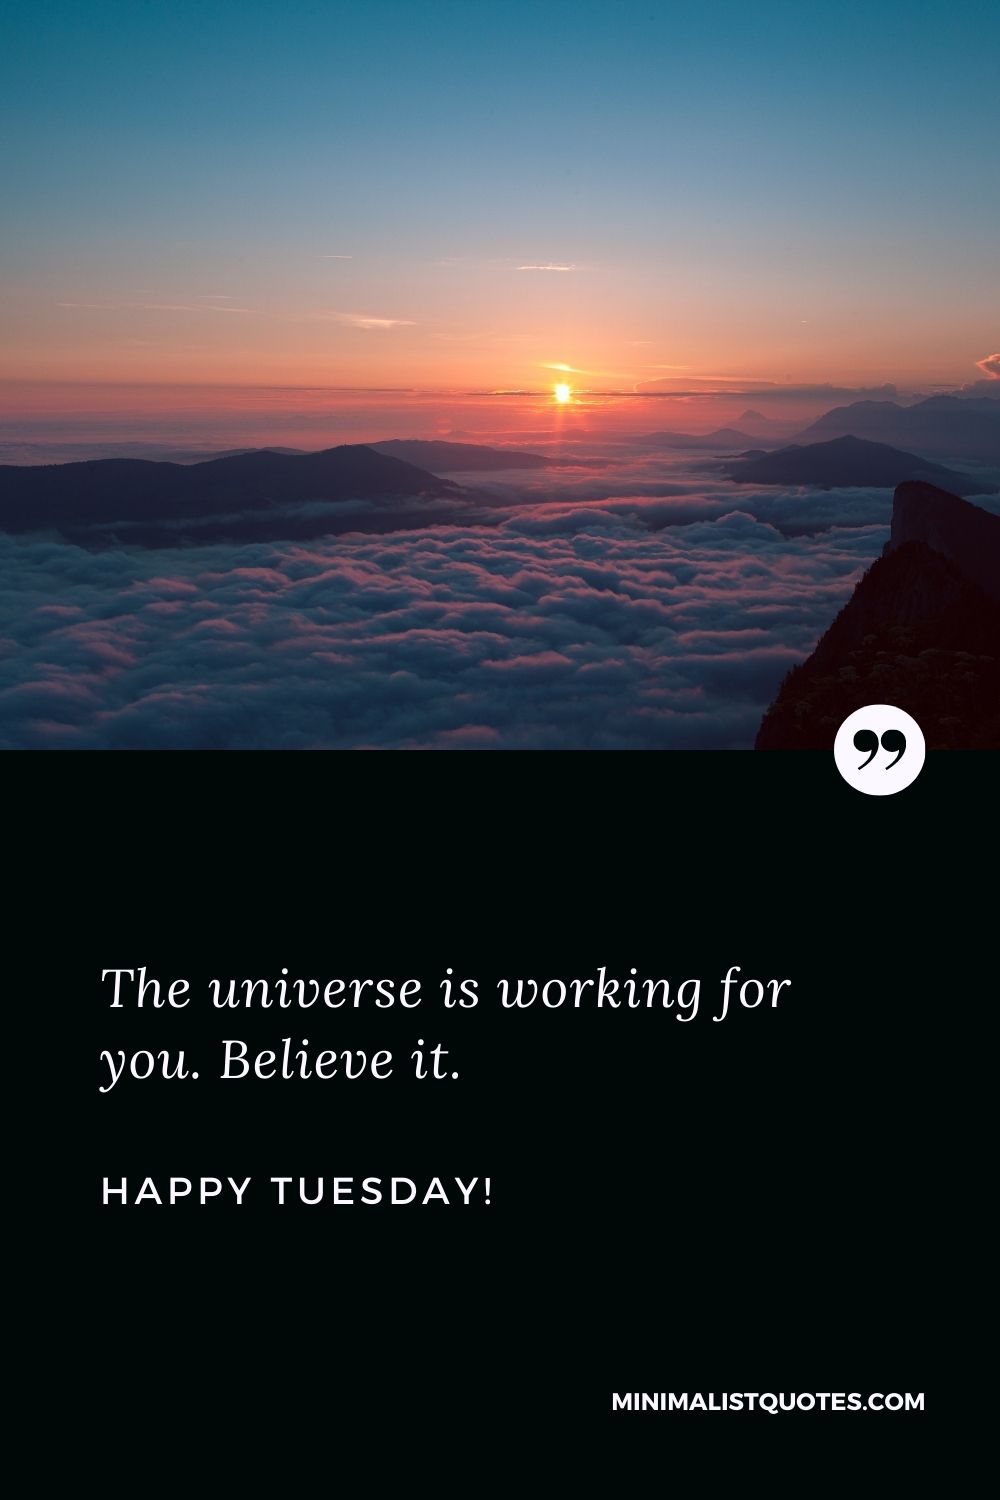 The universe is working for you. Believe it. Happy Tuesday!